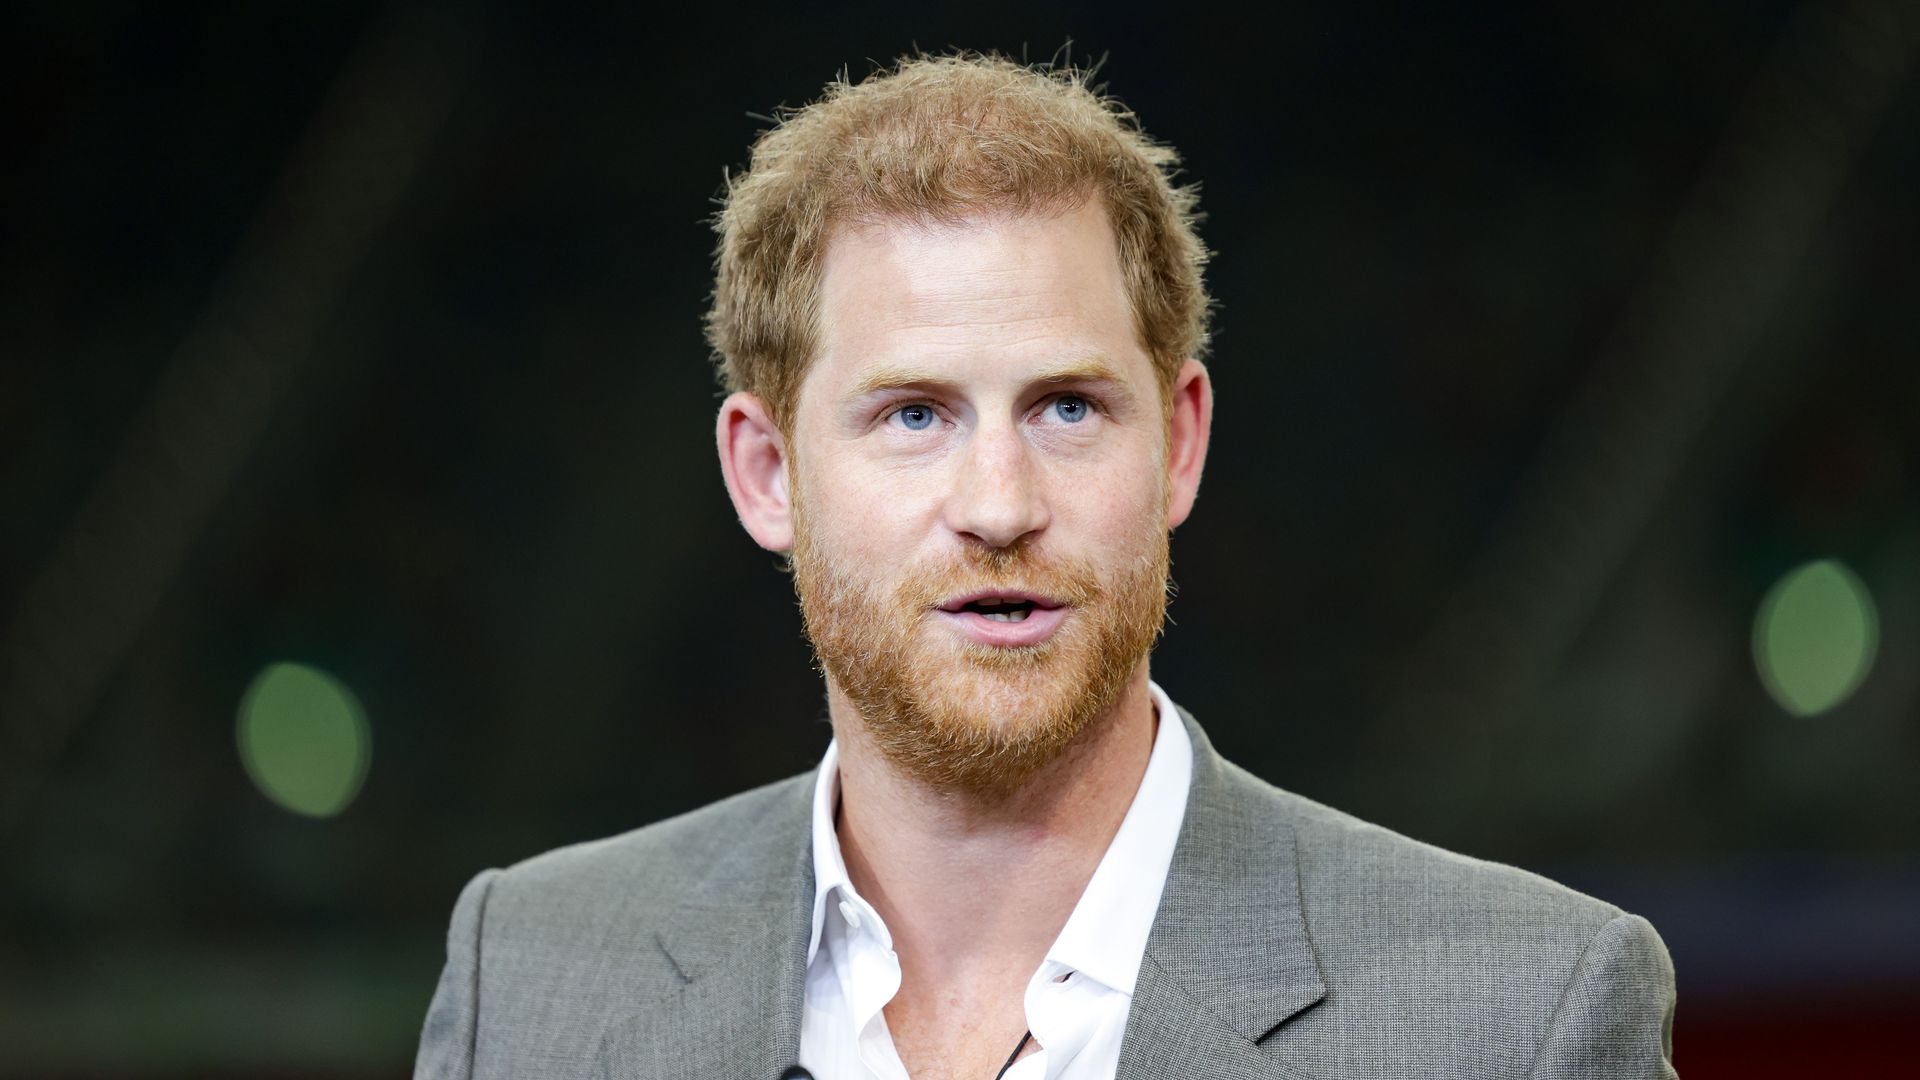 Prince Harry at the press conference for Invictus Games Dusseldorf